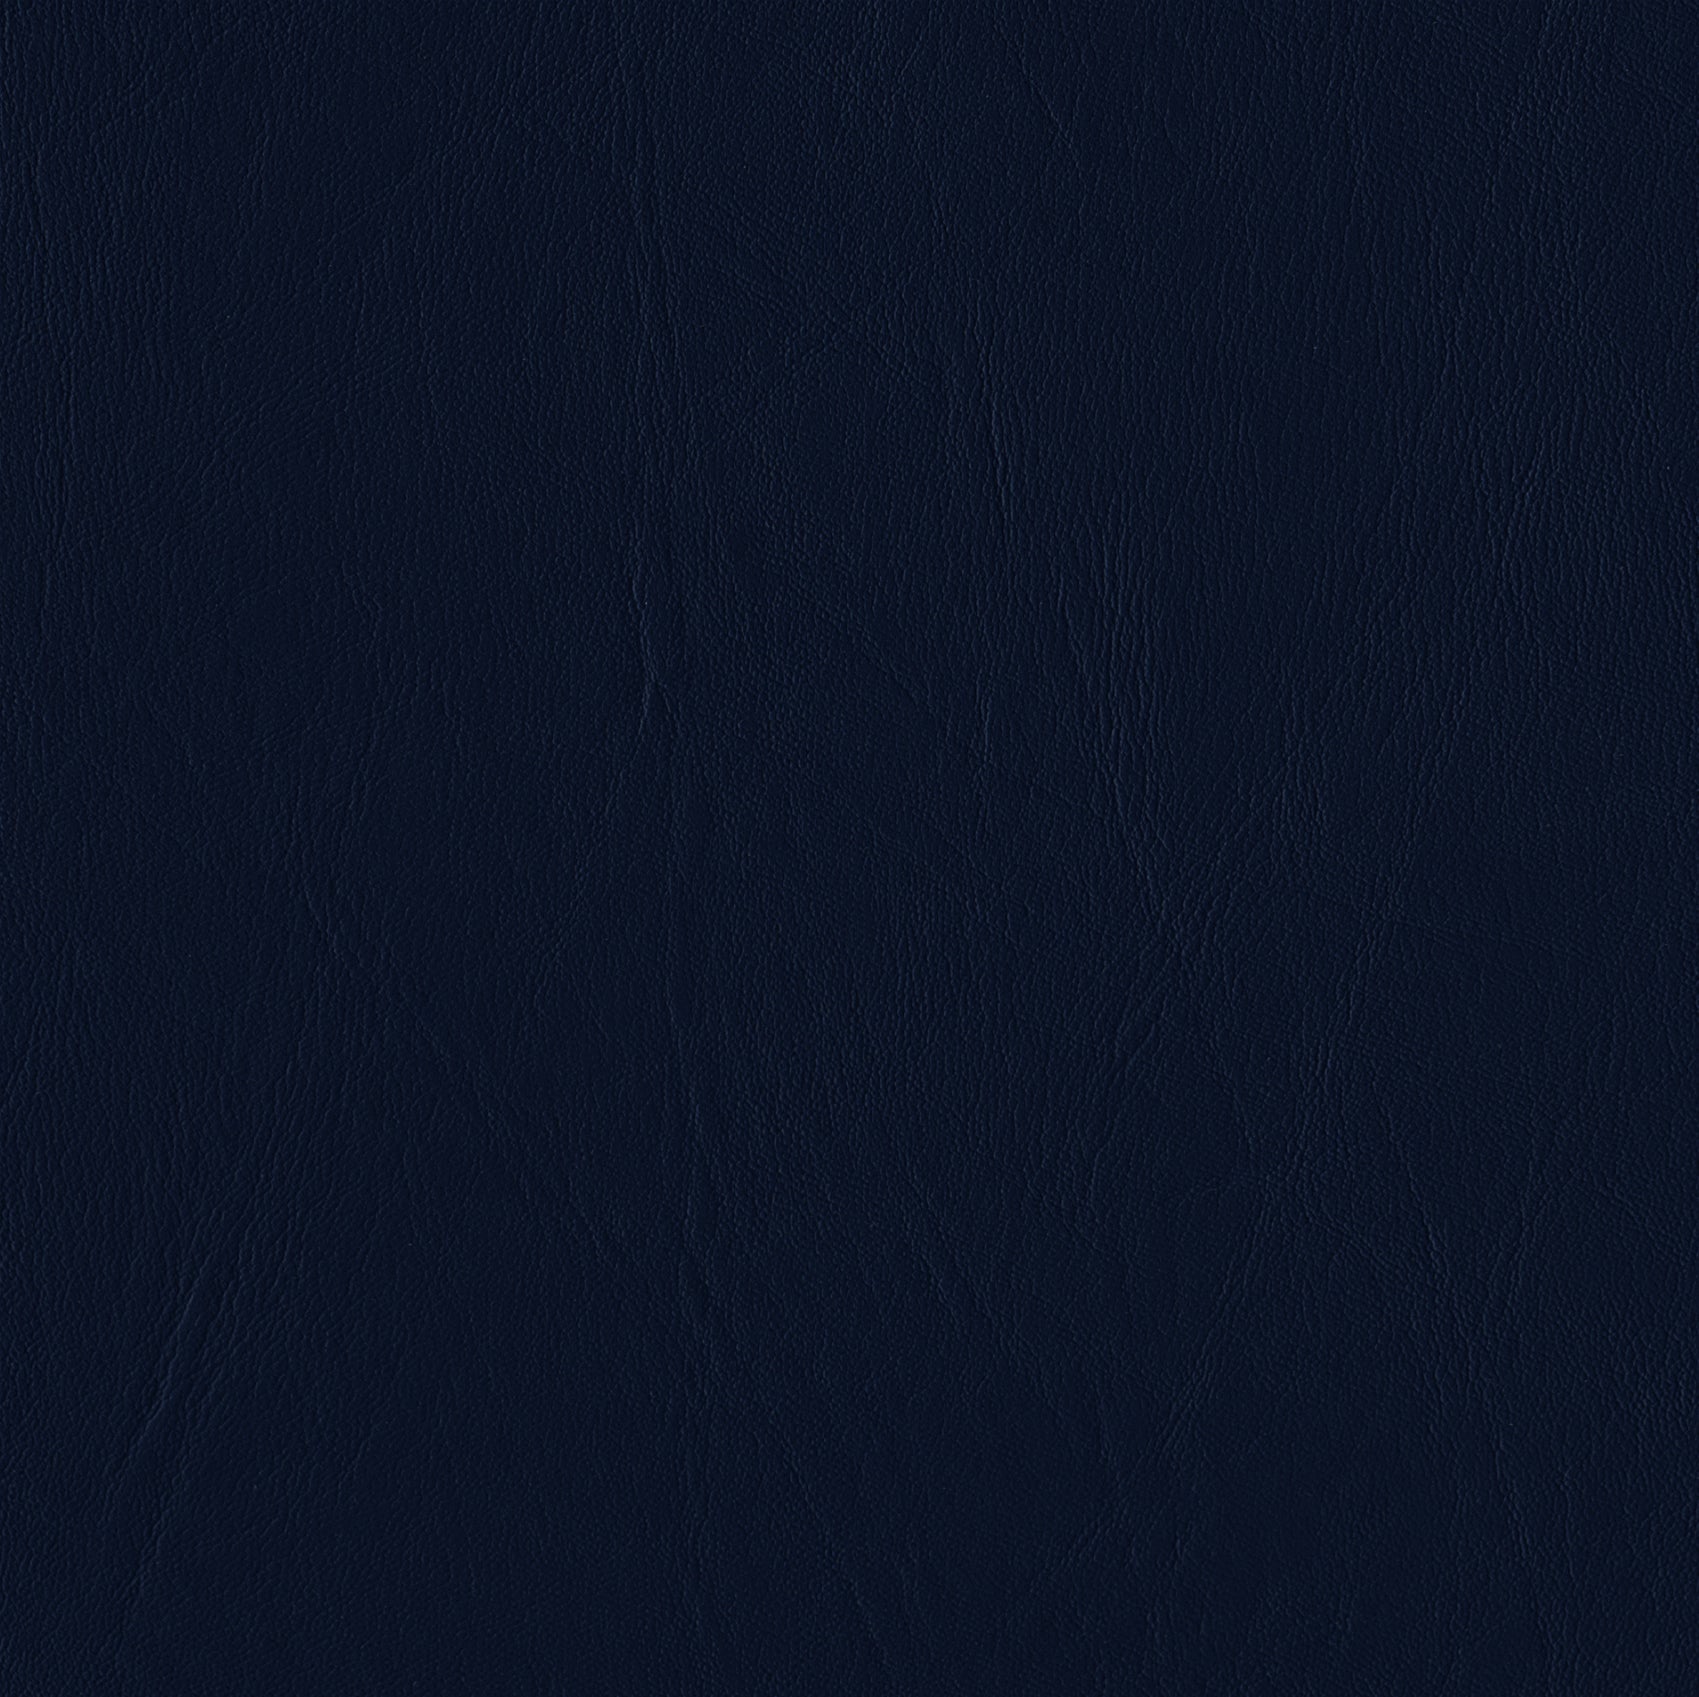    Andriali-Contract-Vinyl_Upholstery-Design-Sade-Color-520FrenchNavy-Width-140cm